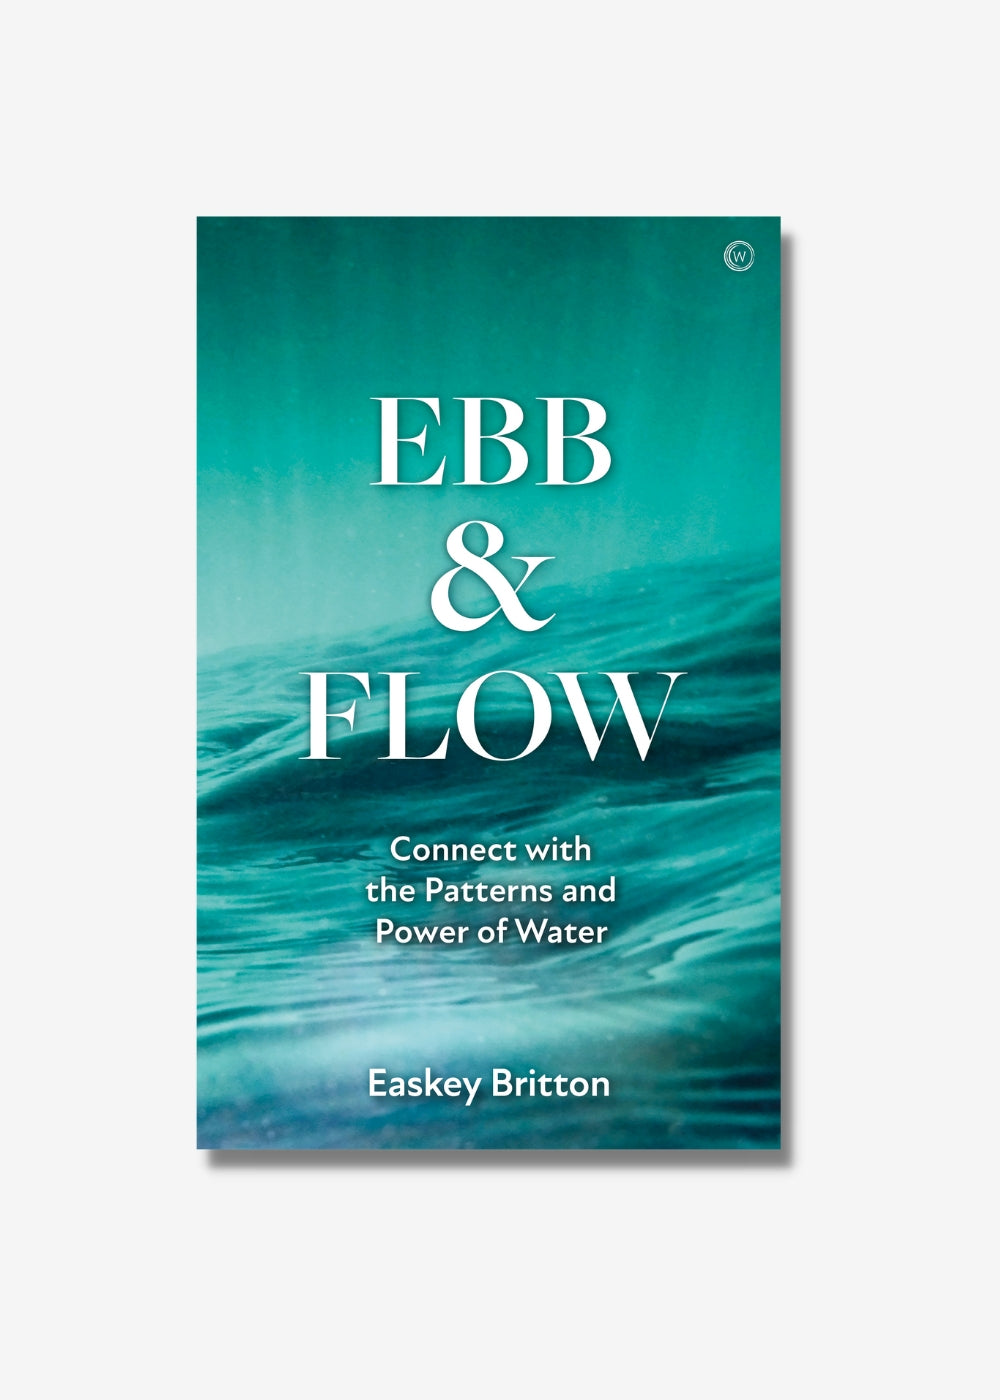 Ebb and Flow by Easkey Britton